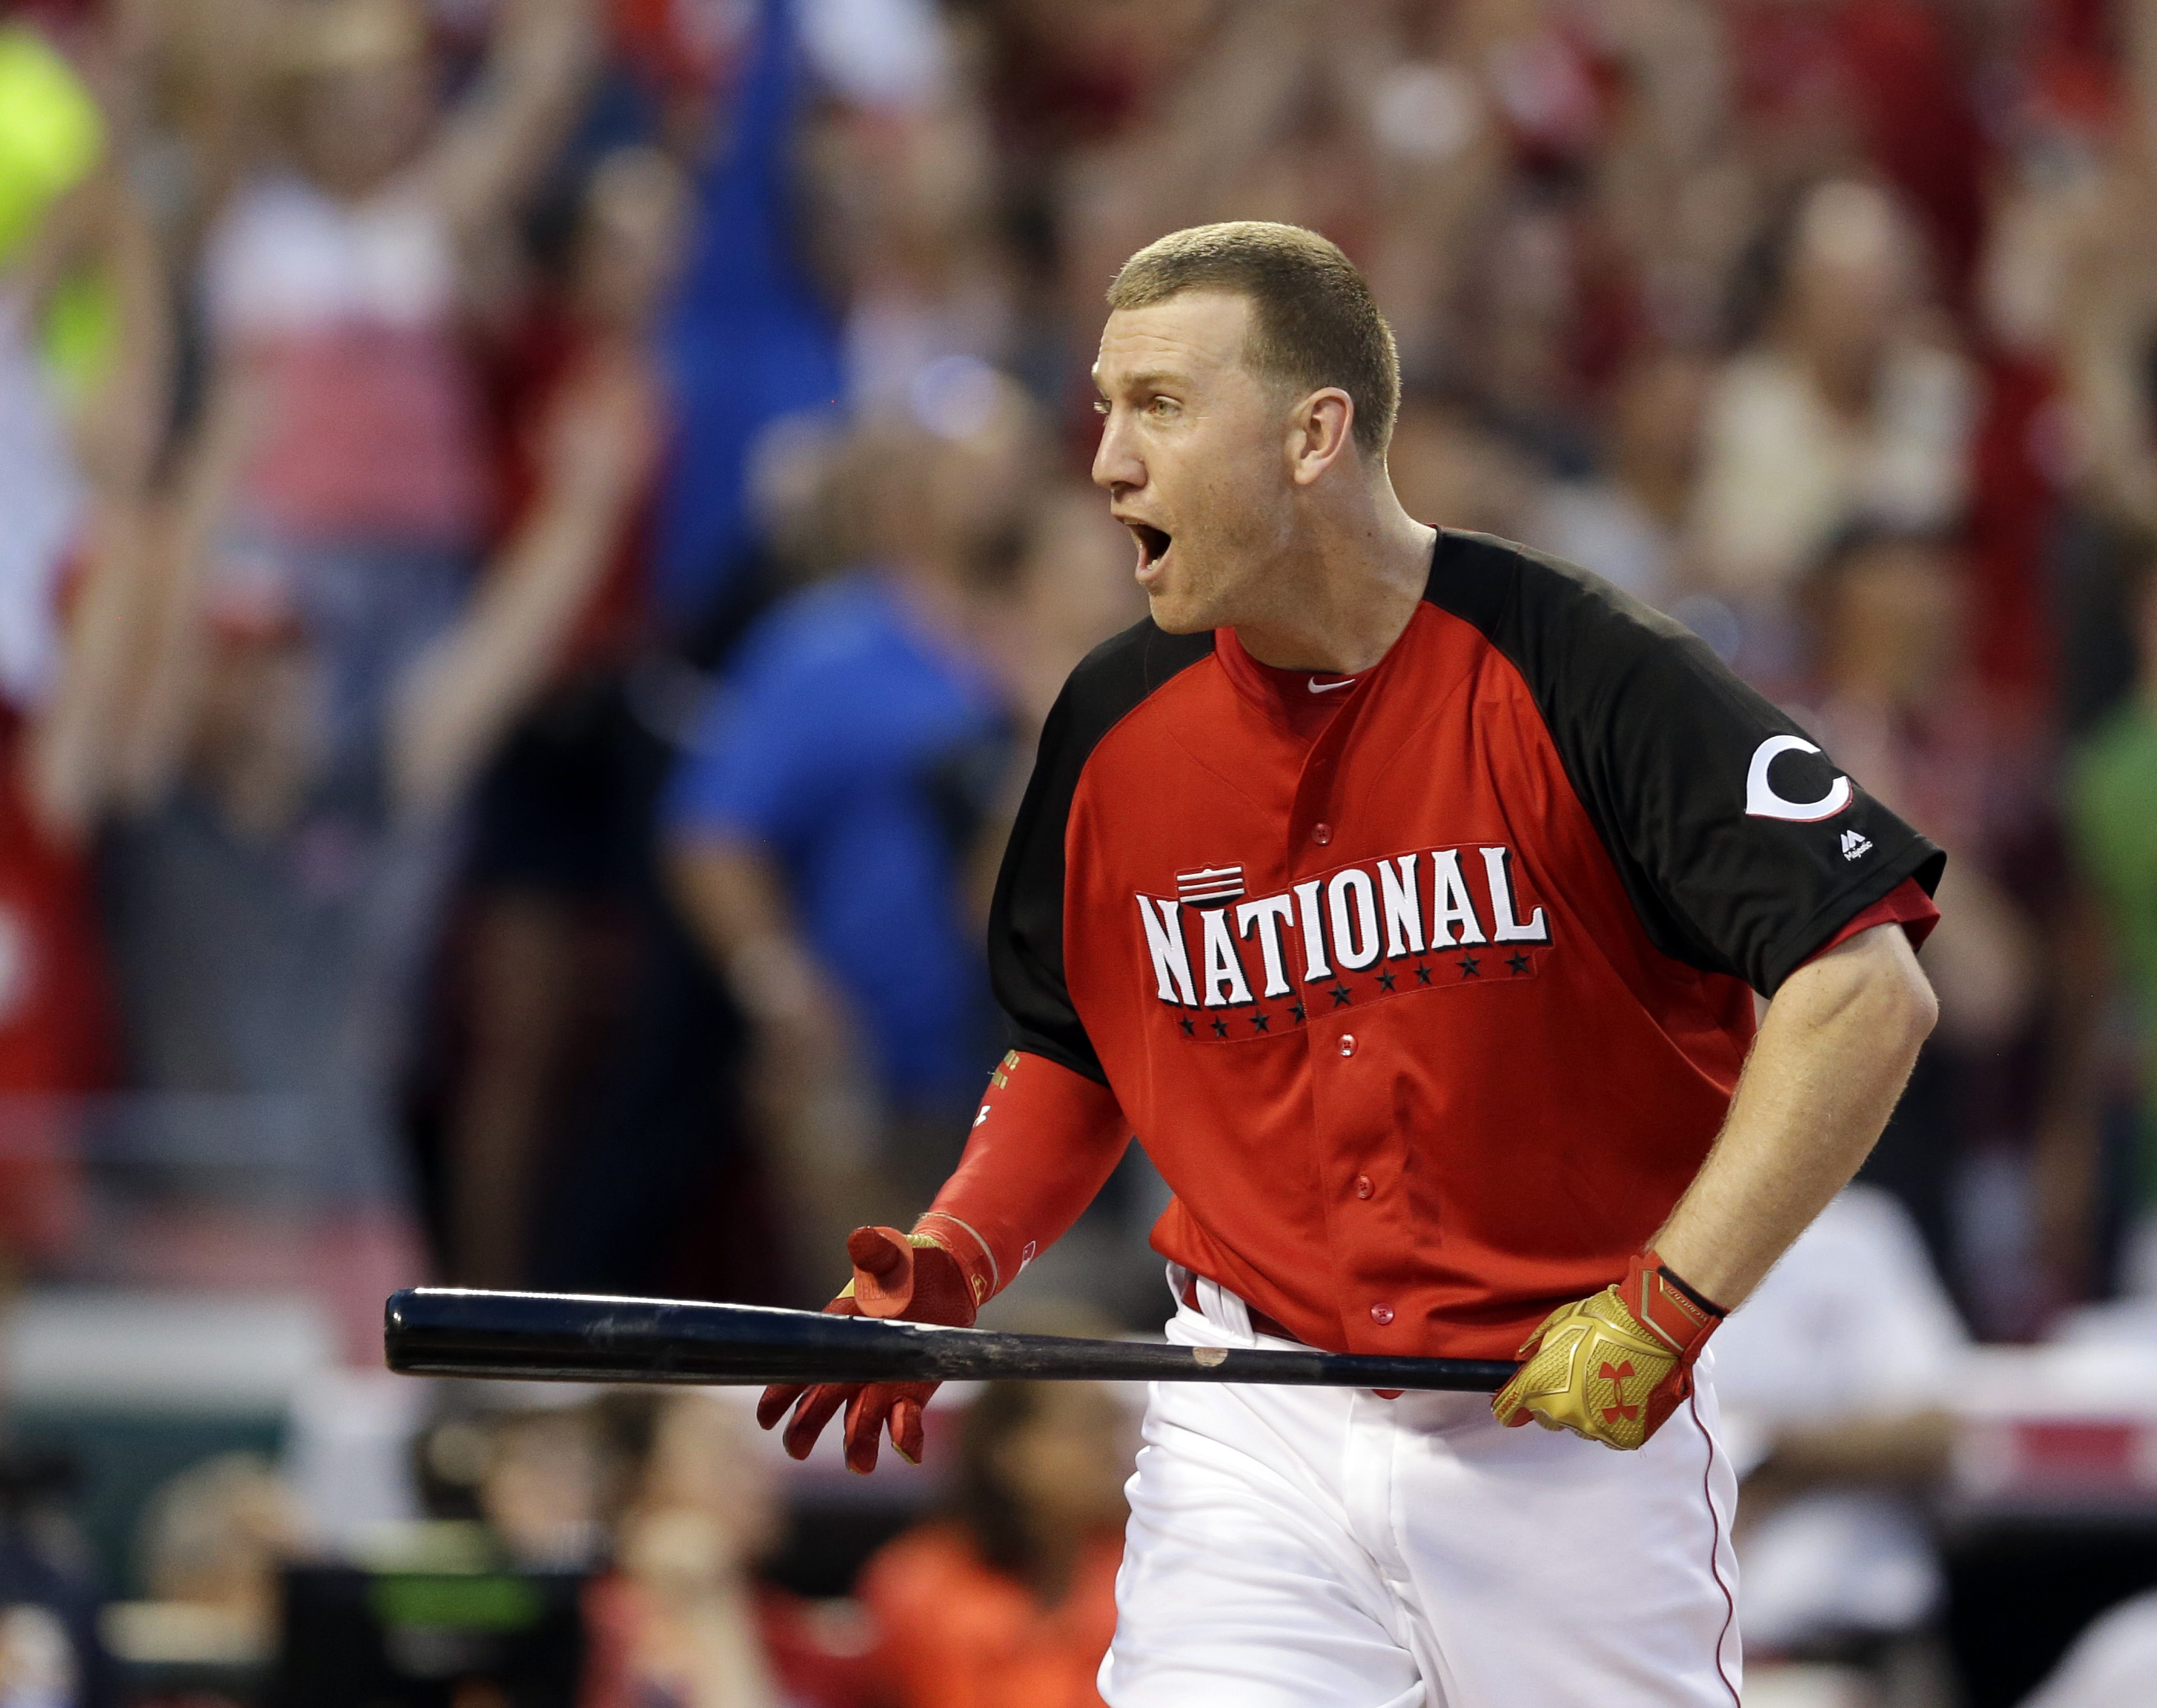 Todd Frazier of the  Cincinnati Reds reacts during the Home Run Derby in Cincinnati on July 13, 2015 (Jeff Roberson—AP)